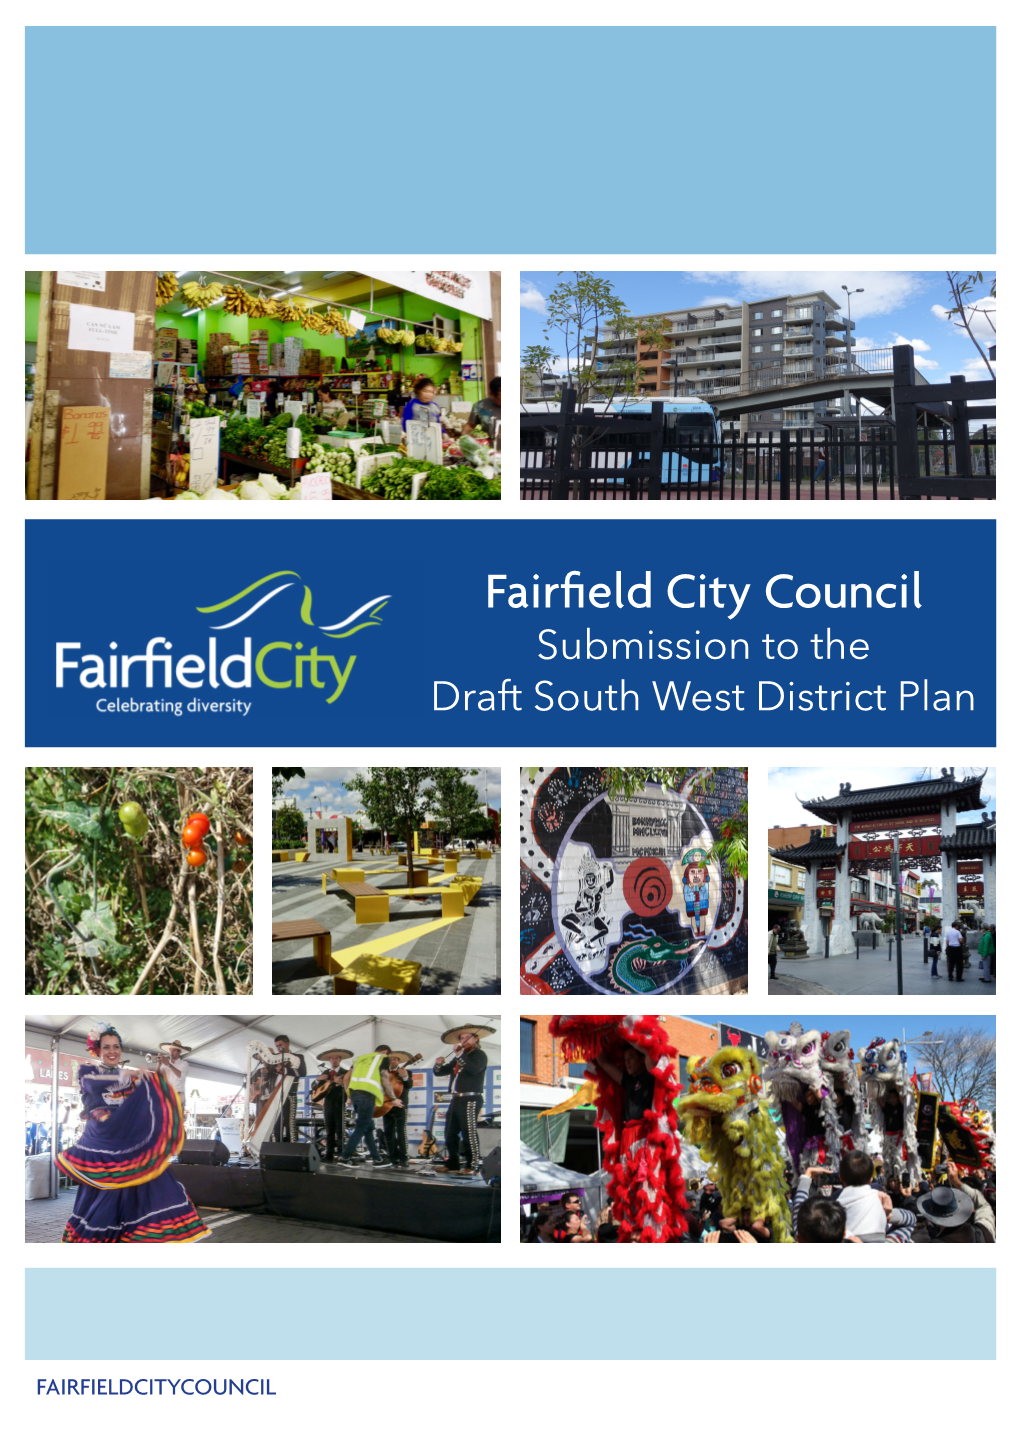 Fairfield City Council Submission to the Draft South West District Plan